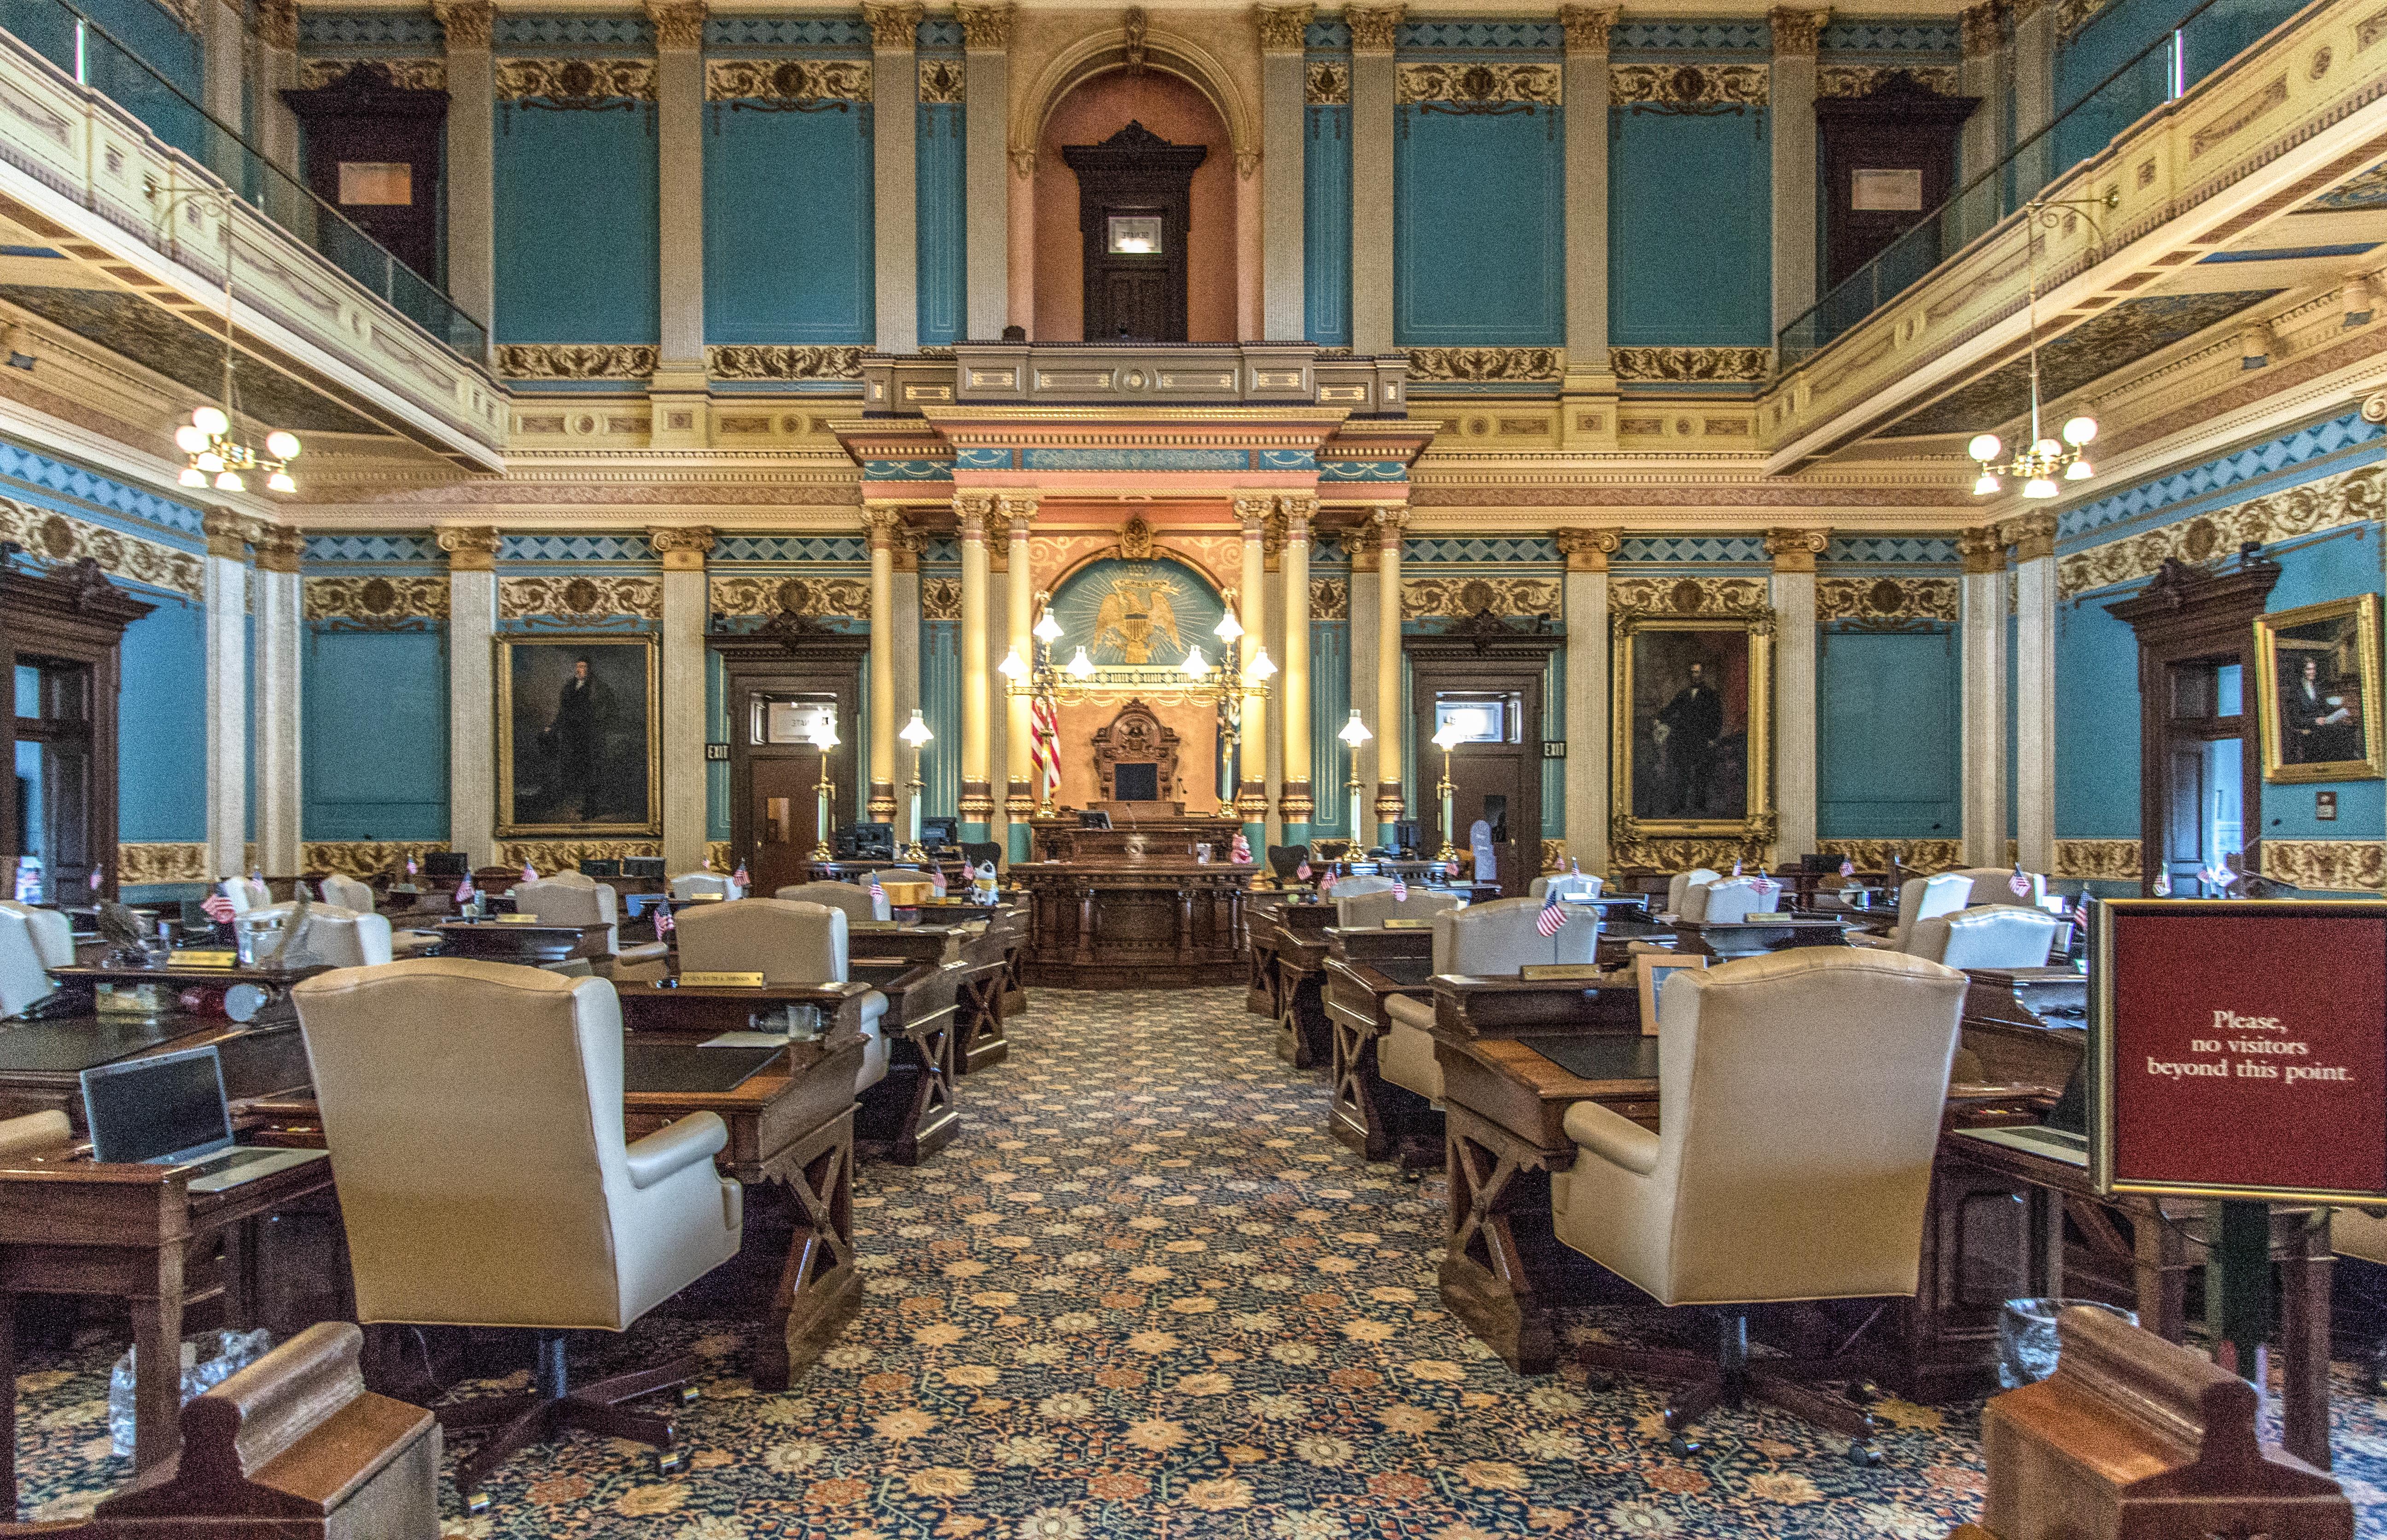 Ornate interior of the Senate Chambers for the state of Michigan lawmakers at the capitol building in downtown Lansing.